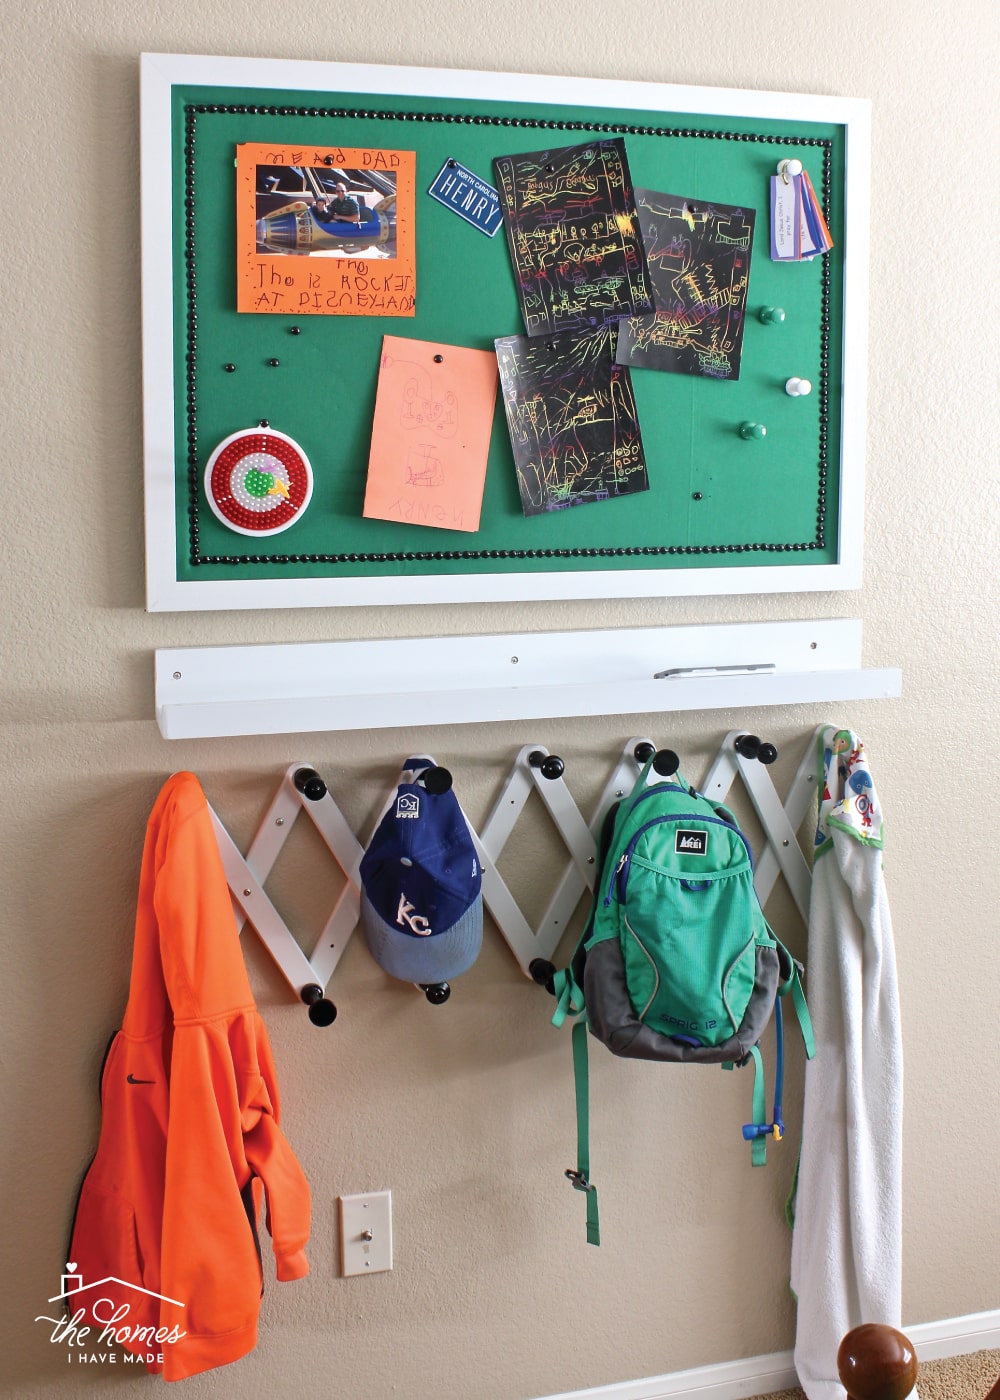 Give a basic bulletin board an easy, inexpensive and stylish upgrade with fabric and nailhead trim!